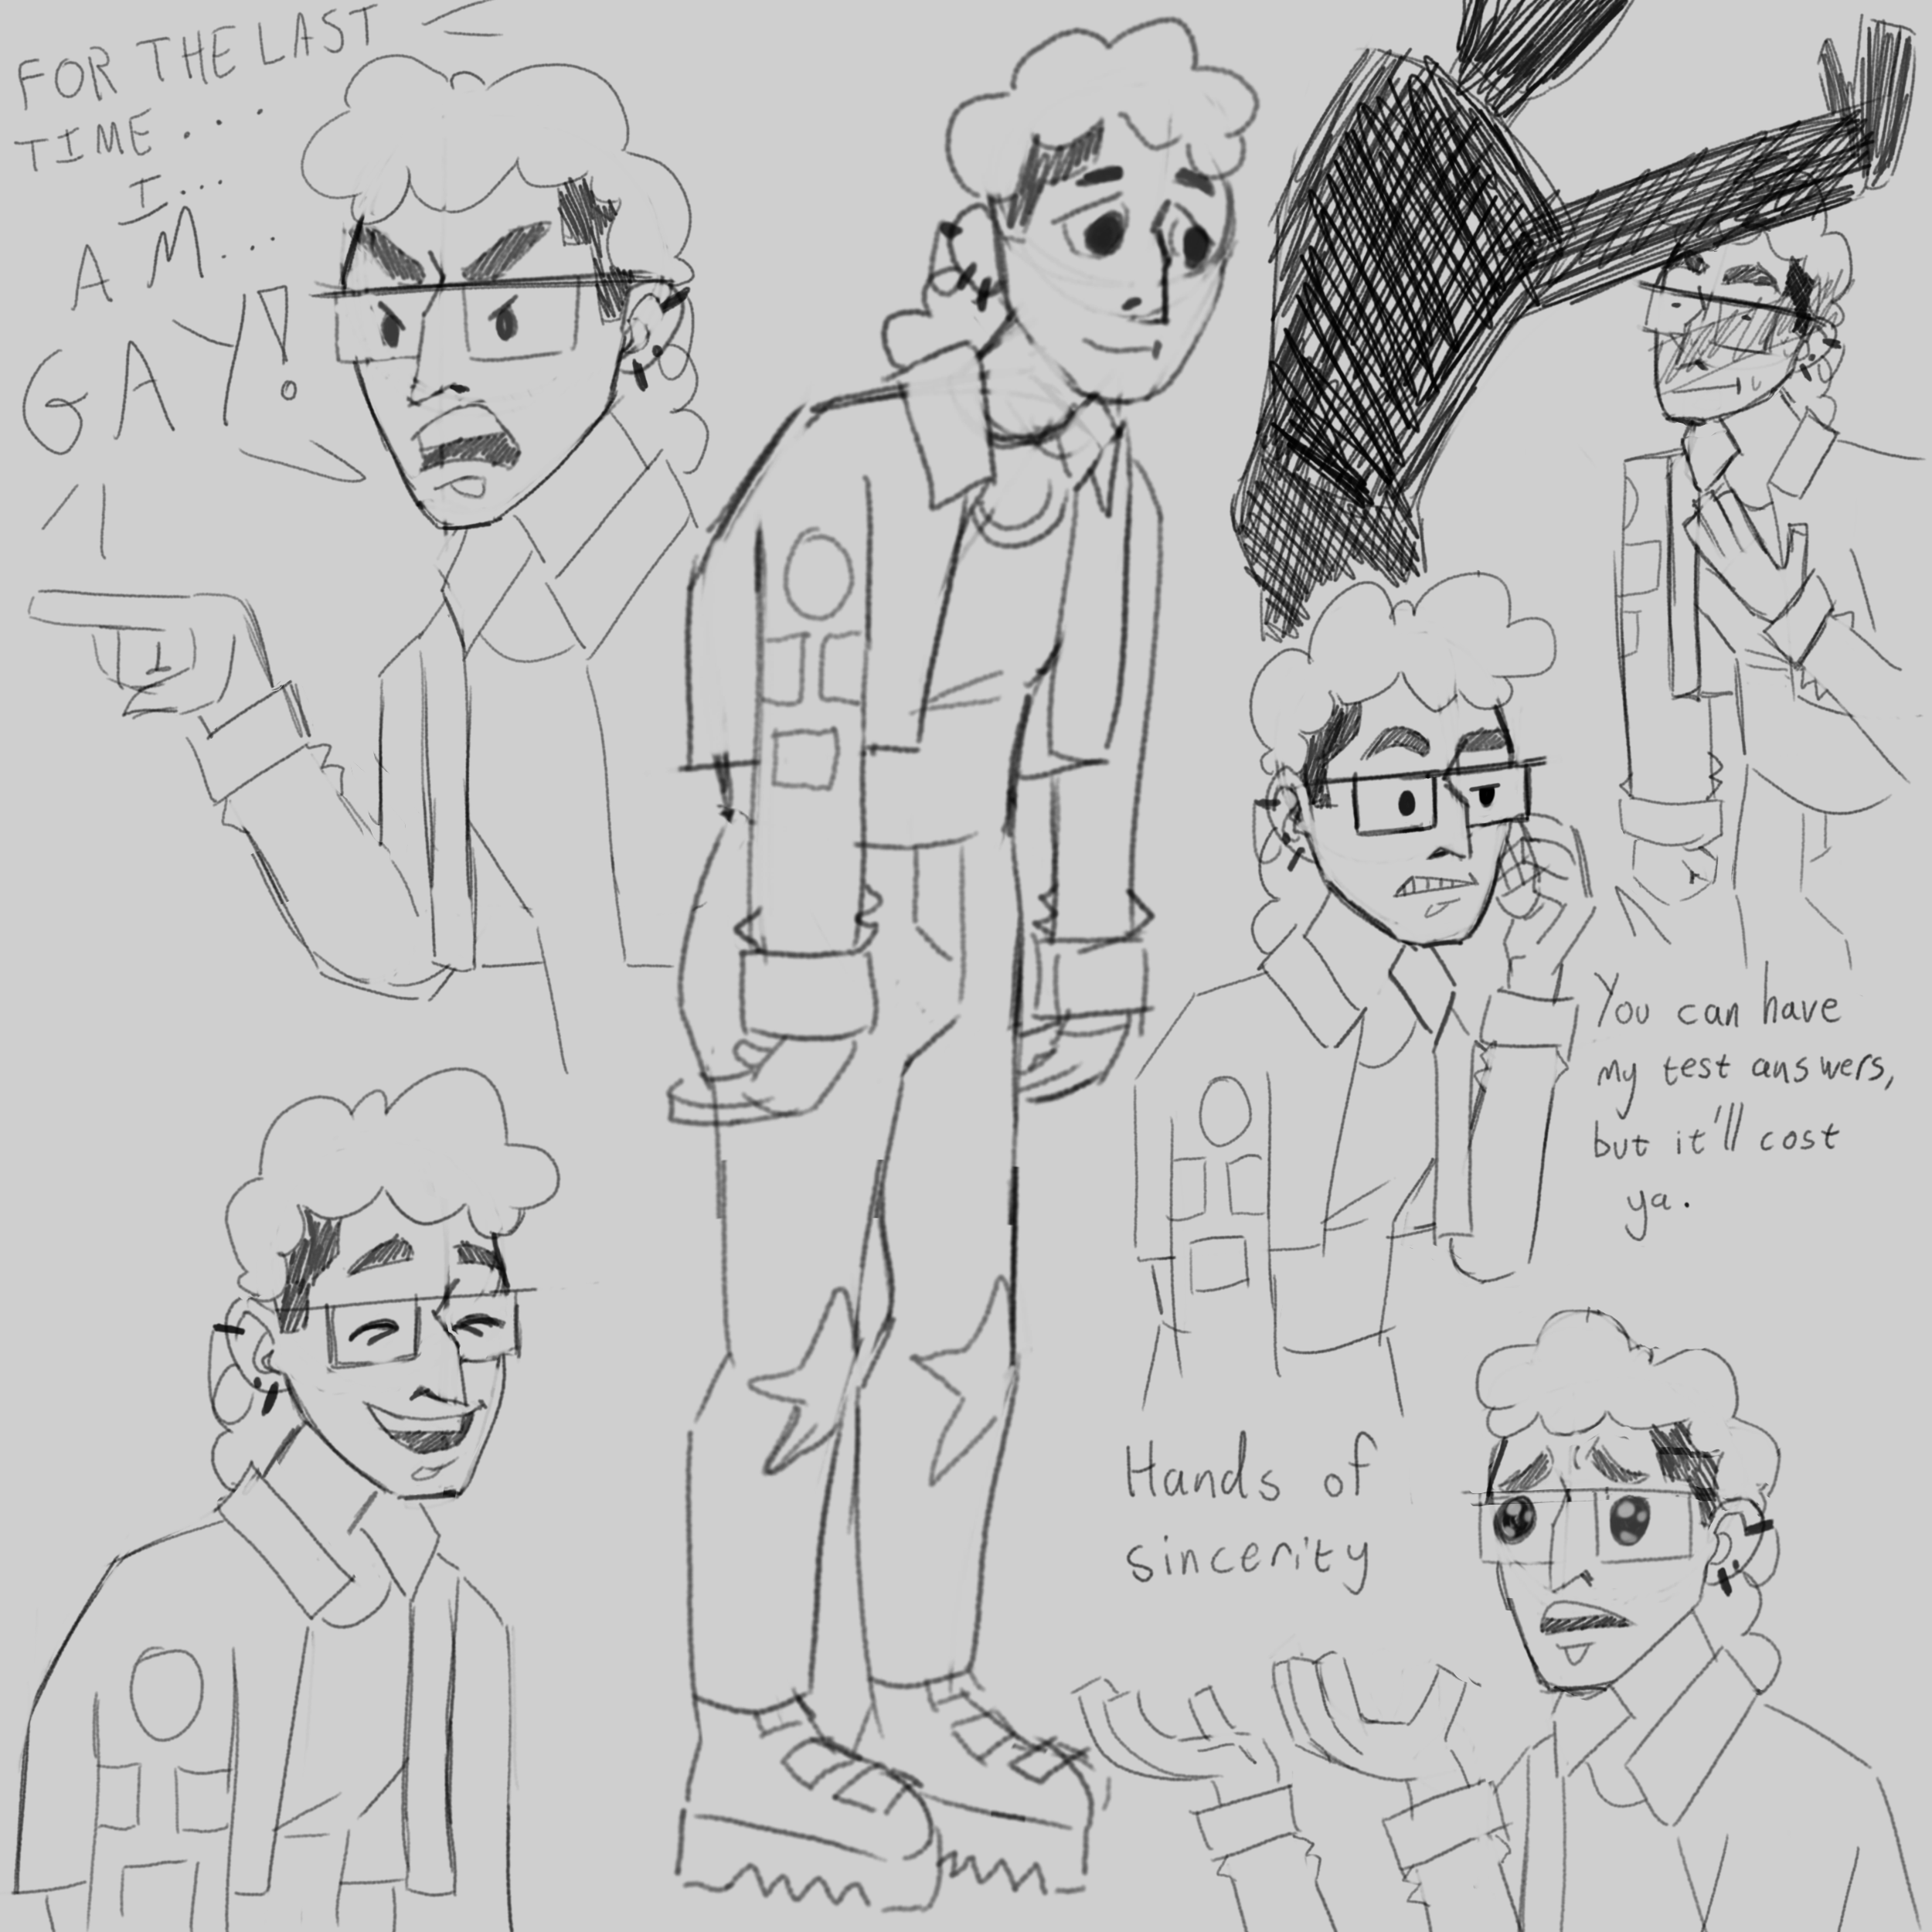 a collage of sketches depicting the artist in the style of Clone High.